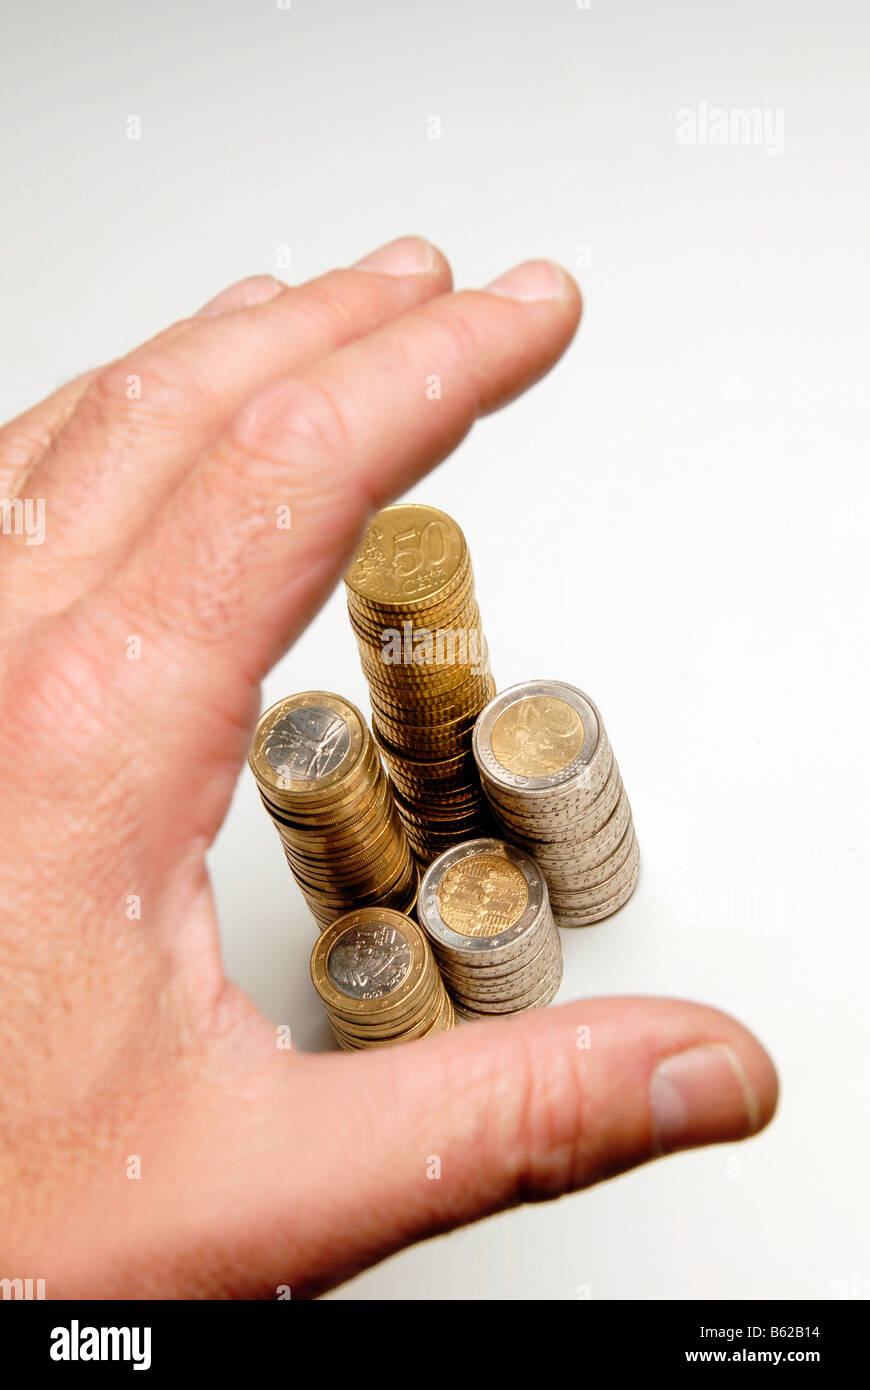 Hand above a pile of coins Stock Photo